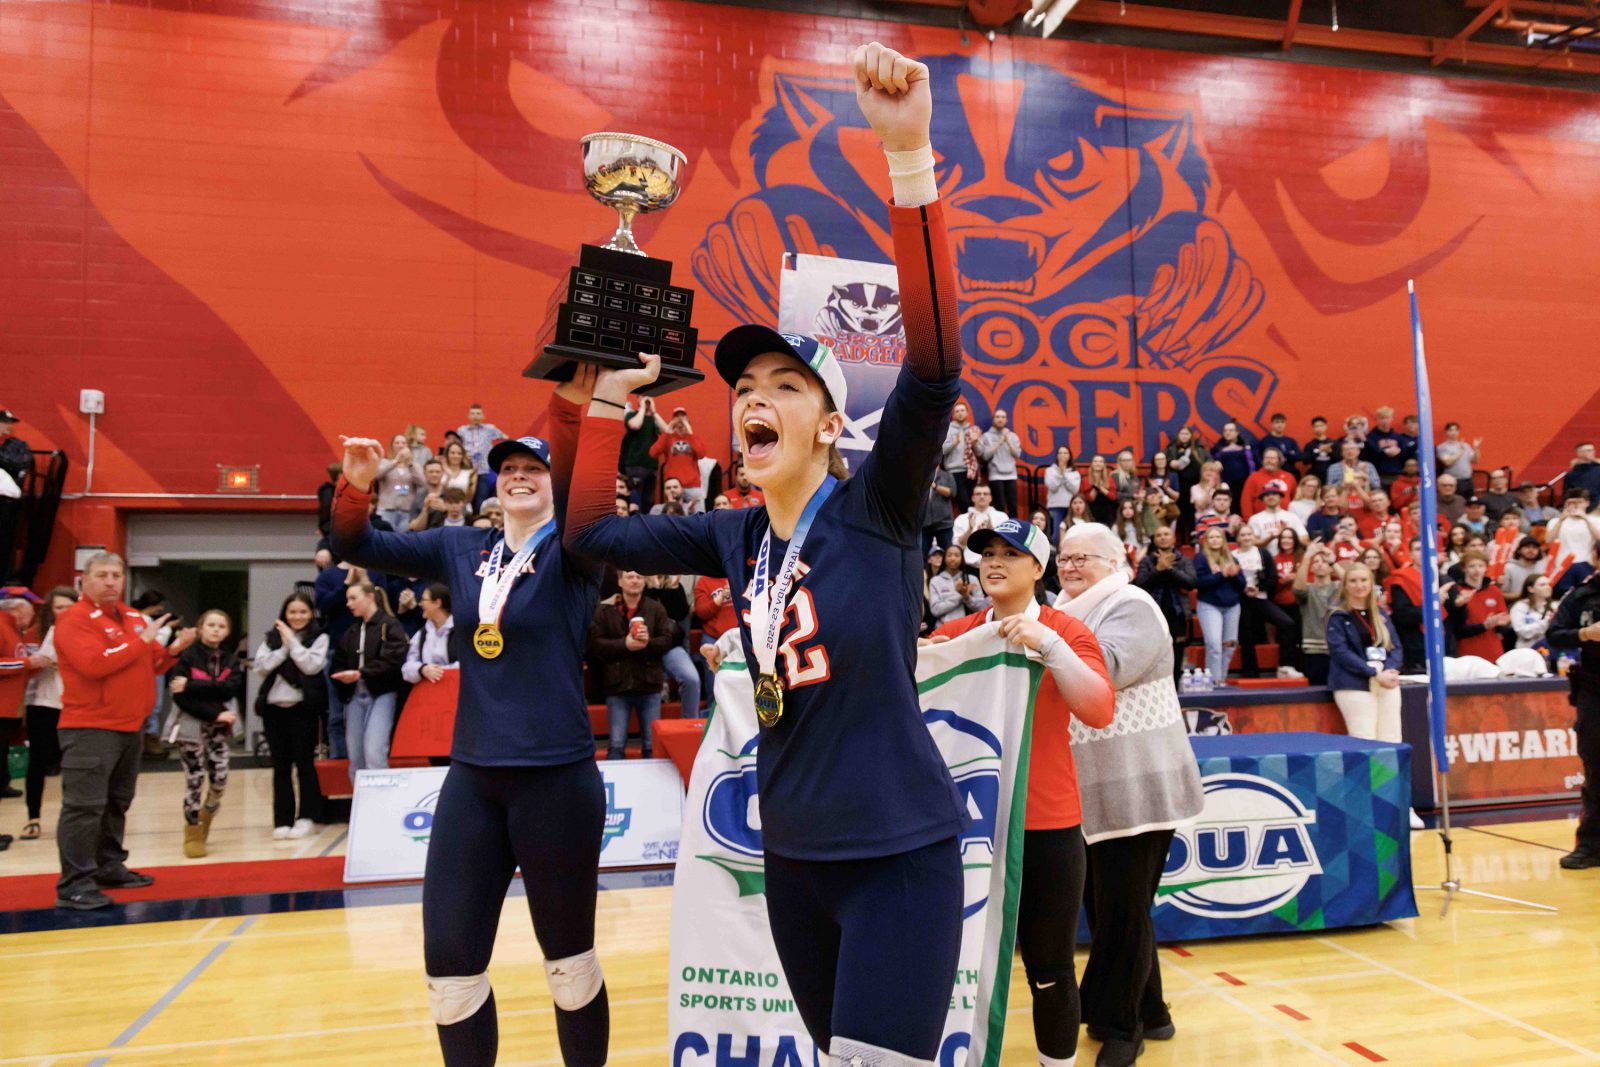 Two women’s volleyball athletes cheer as they hoist a sports trophy surrounded by fans inside a gymnasium.